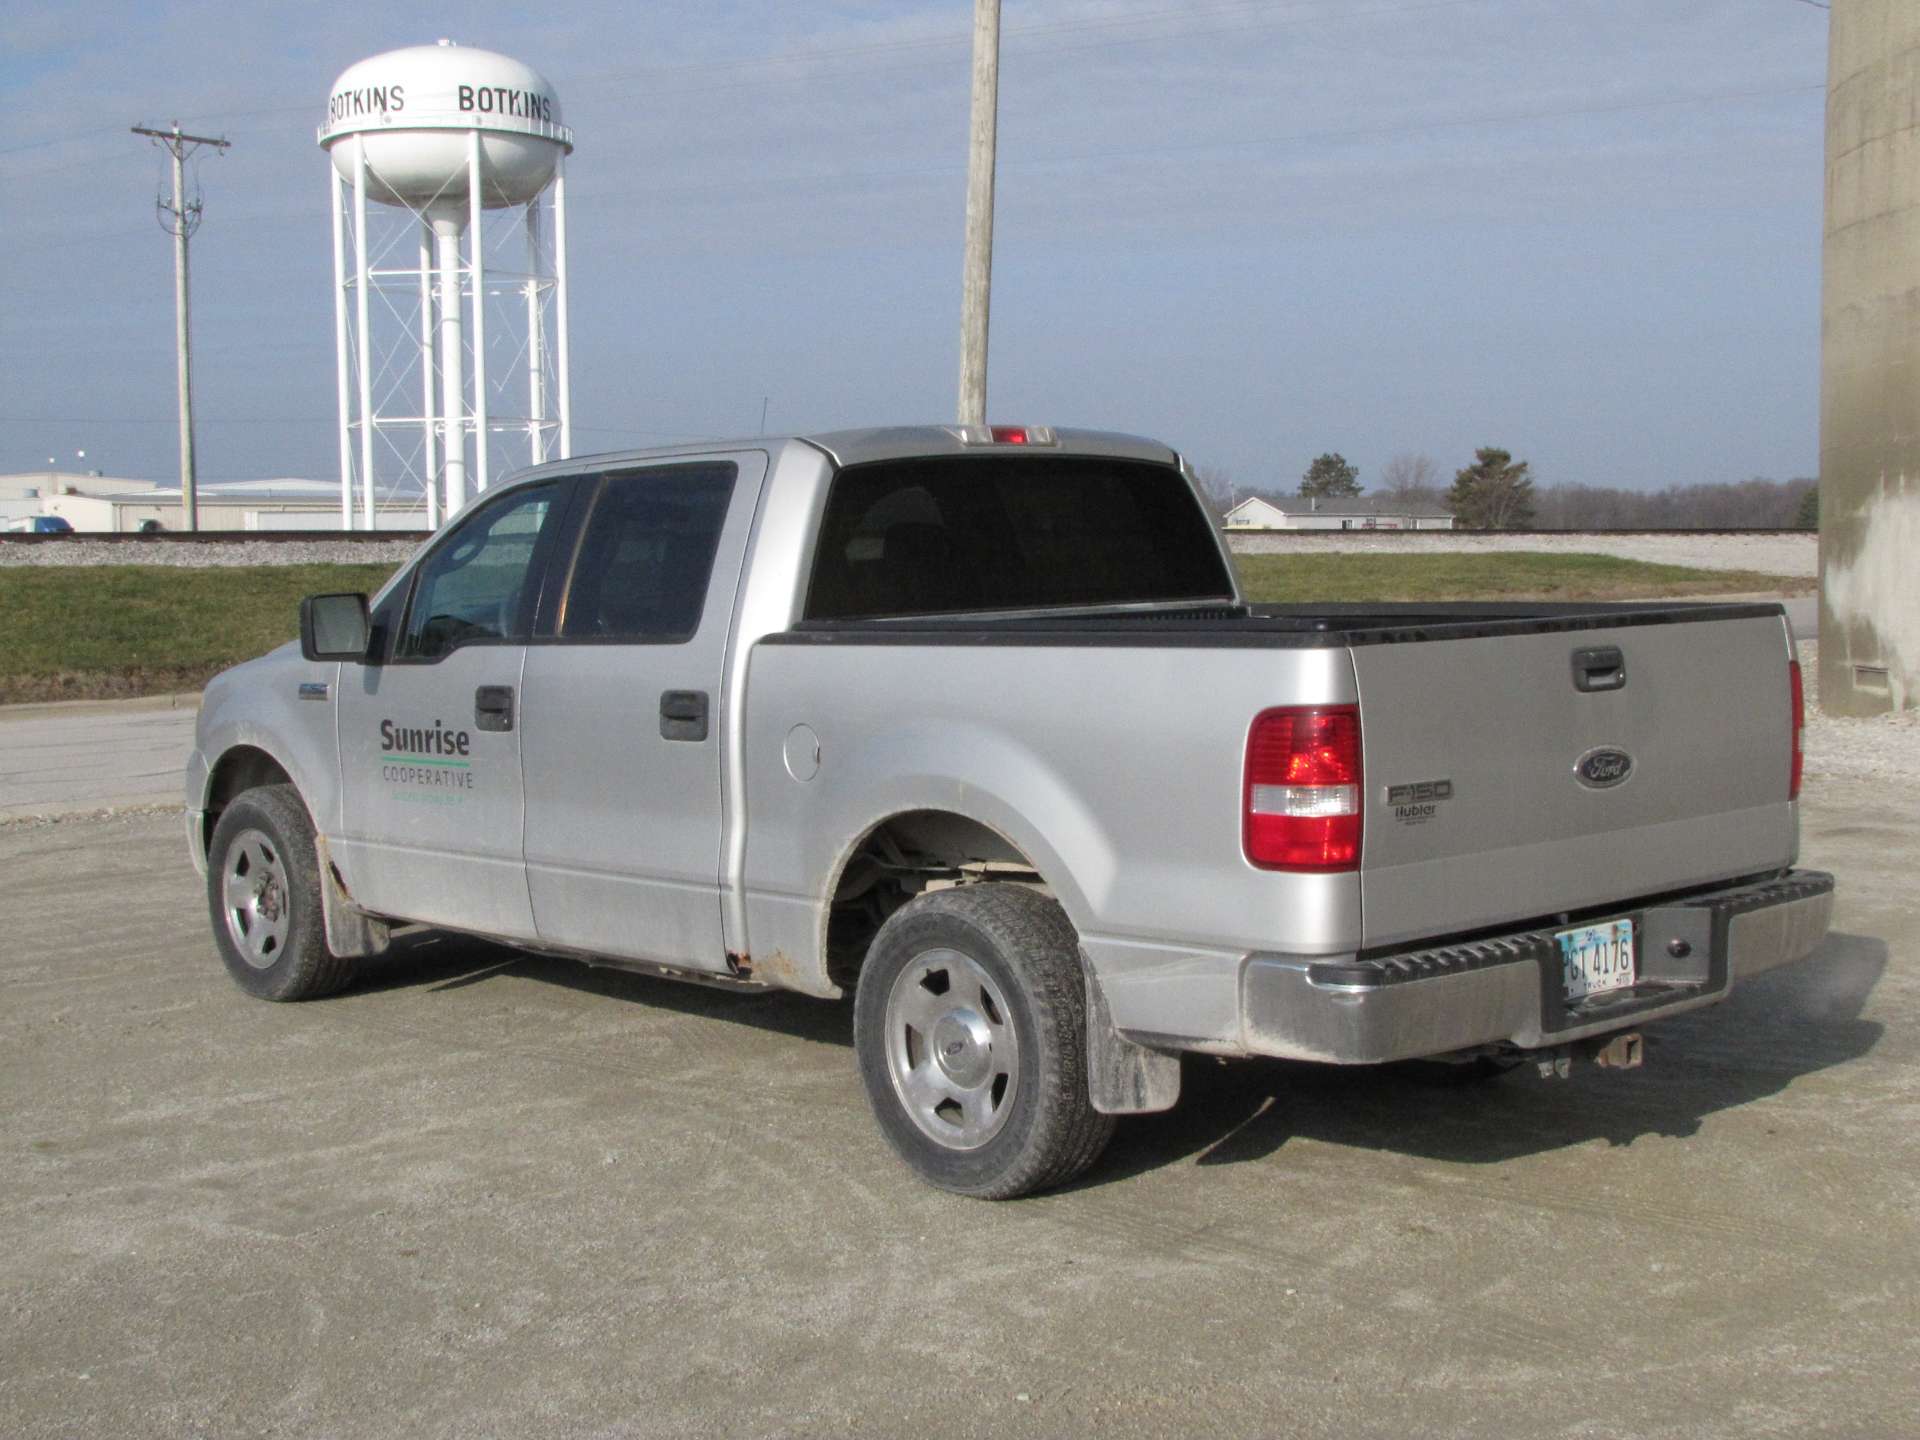 2005 Ford F-150 XLT pickup truck - Image 8 of 89